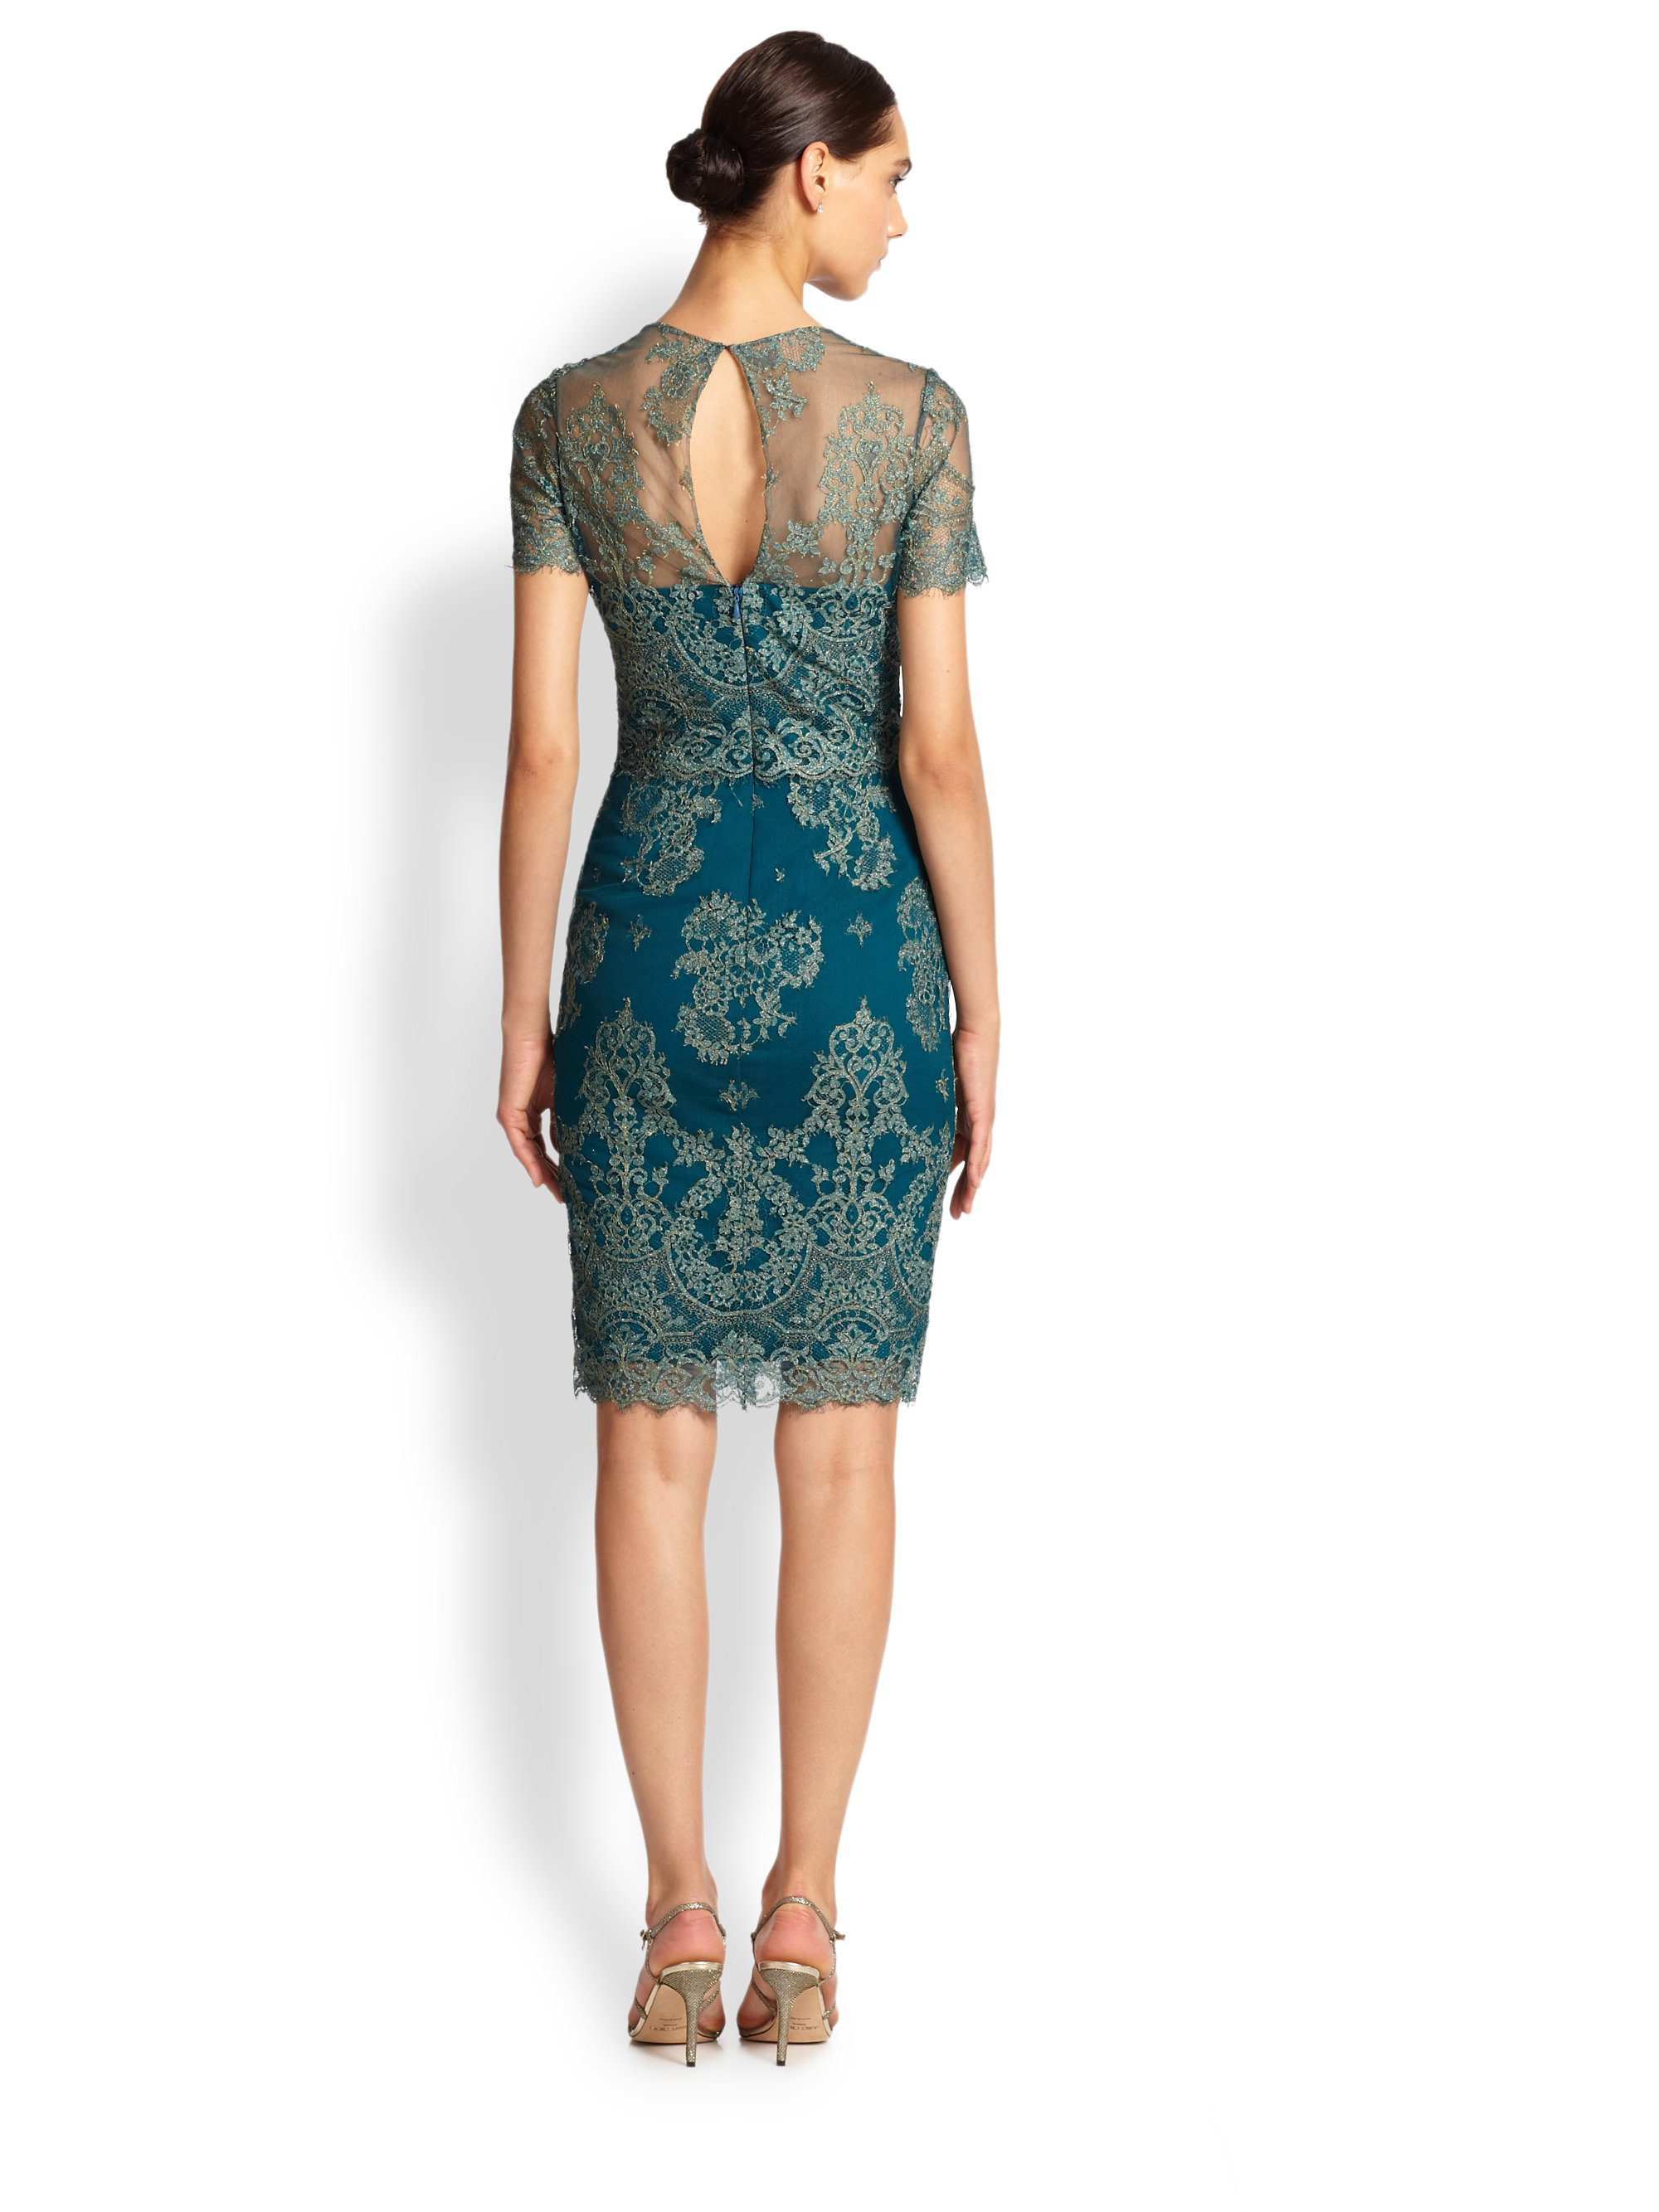 Marchesa notte Lace Dress in Teal ...